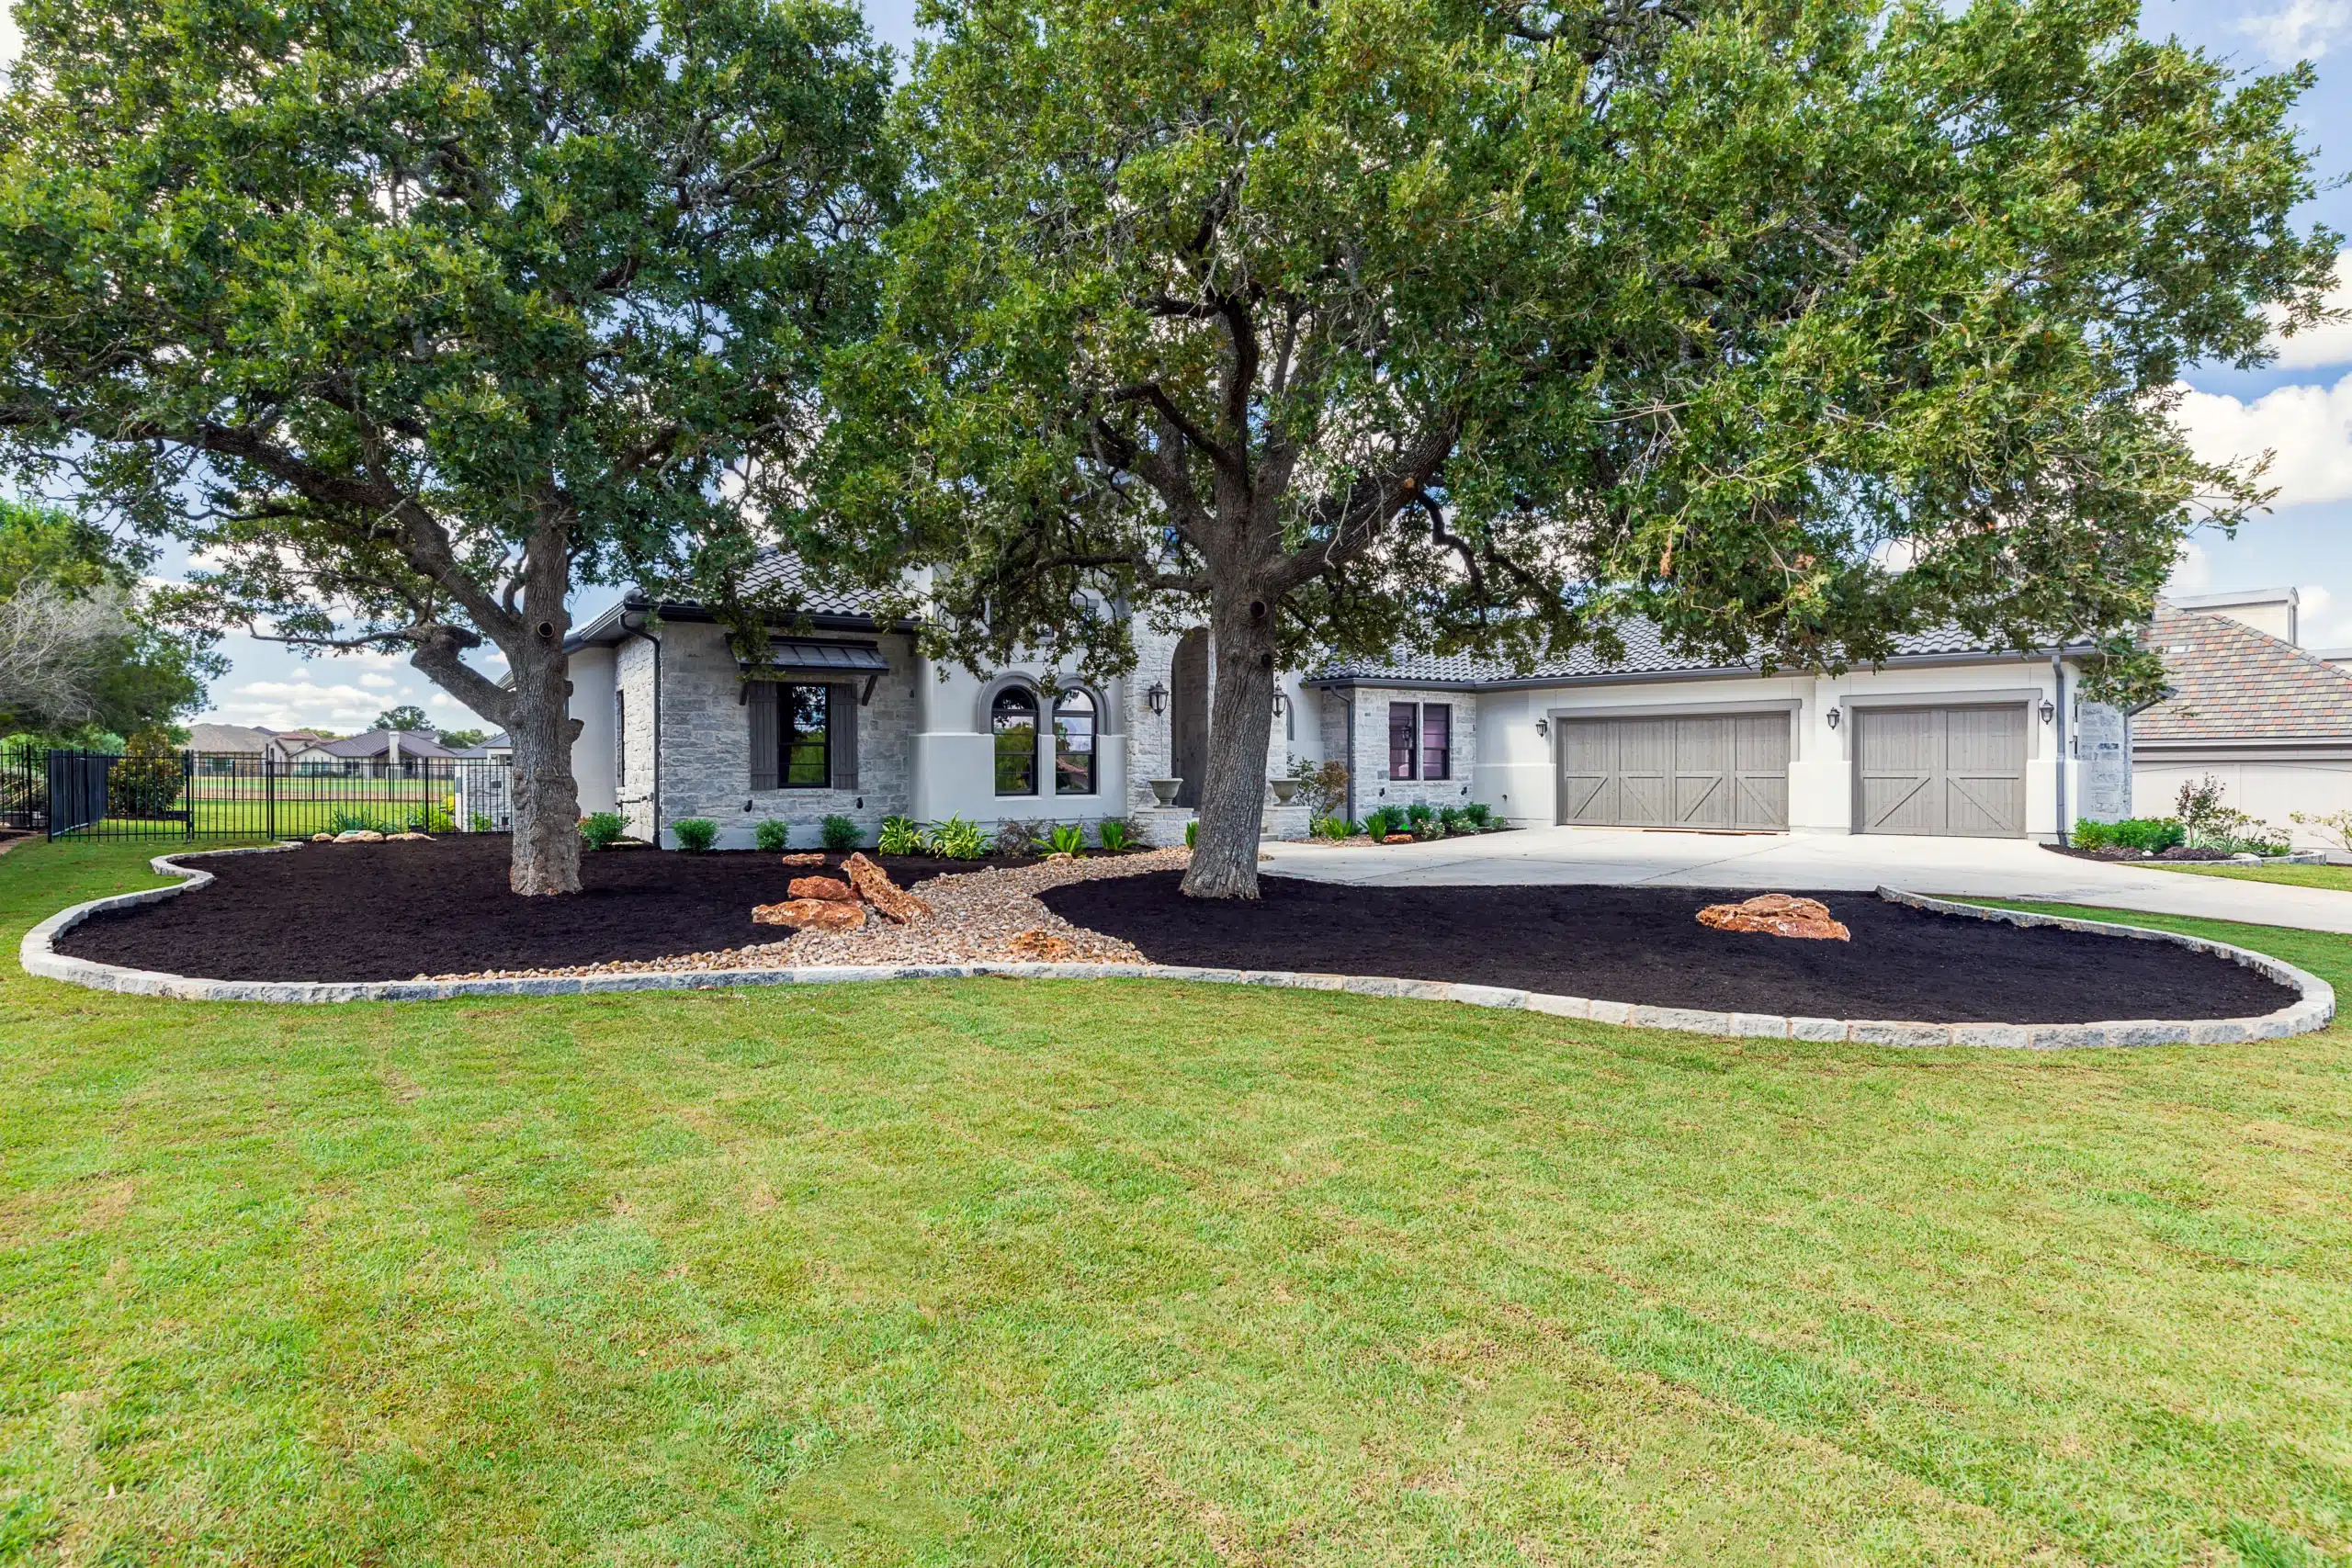 large rock and planter beds around trees in front yard of large home with white rock